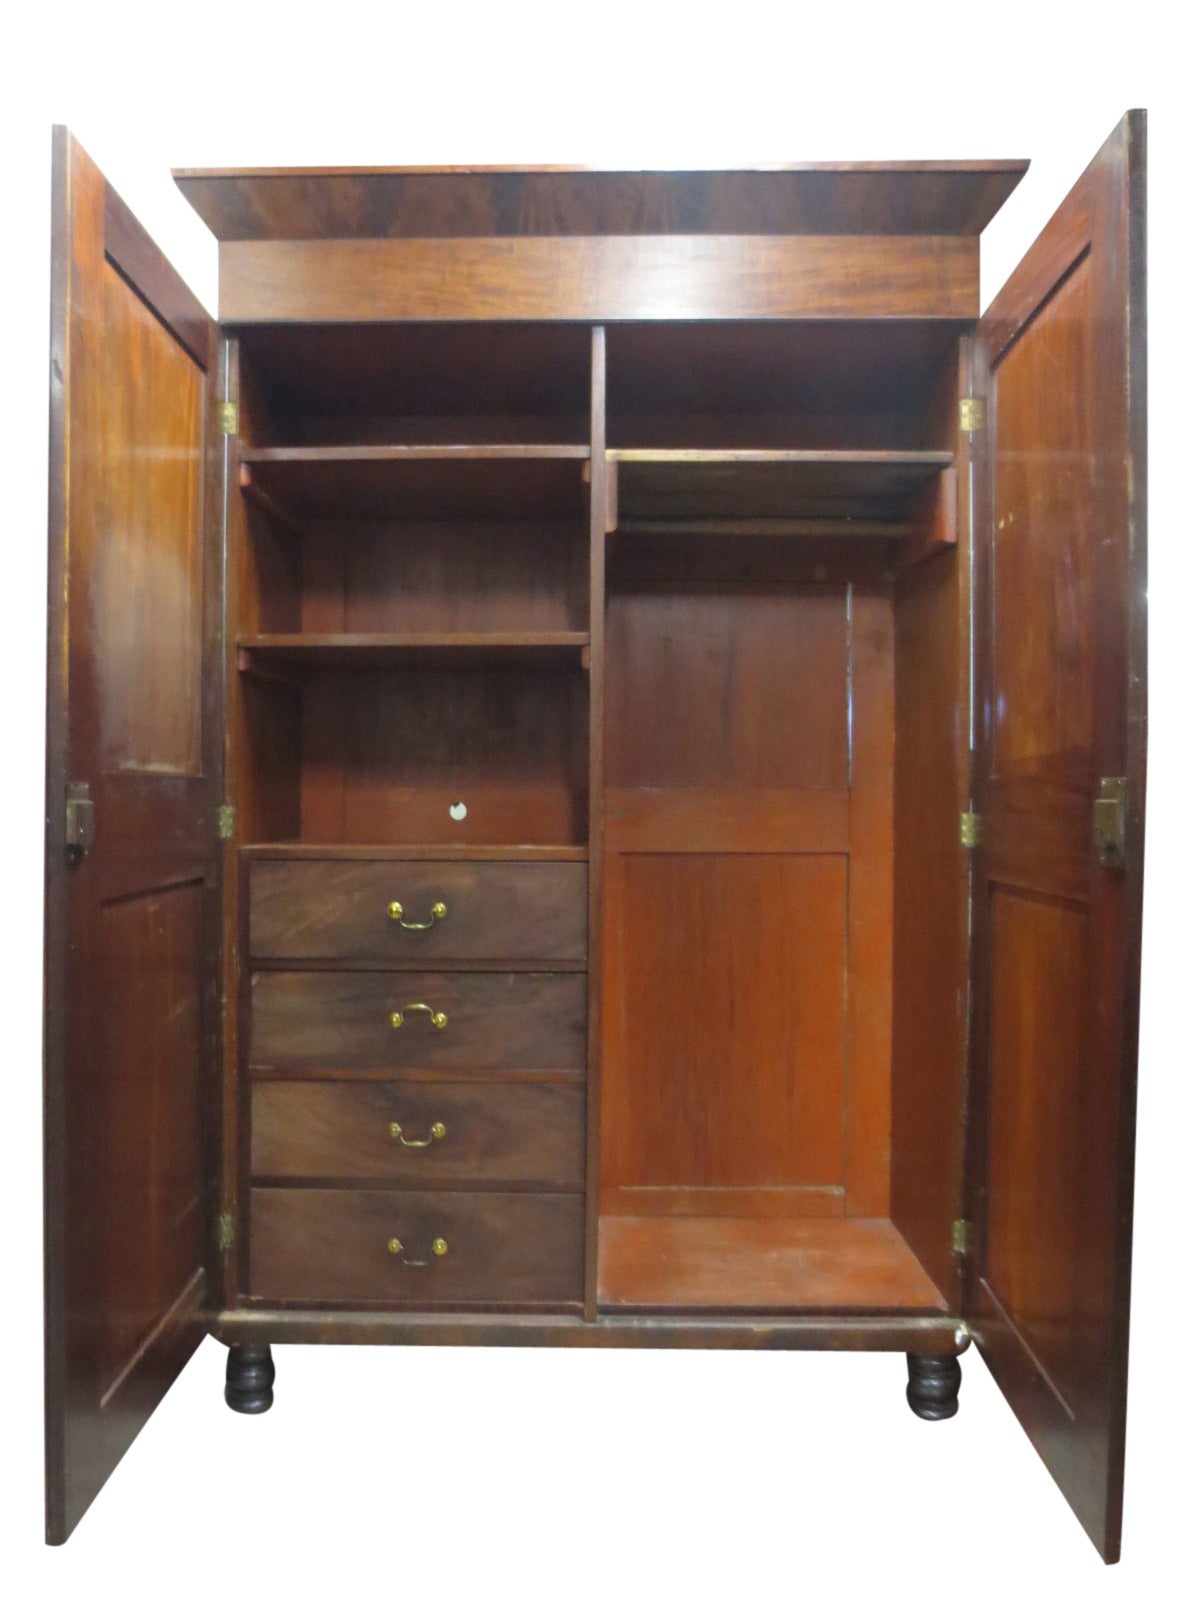 Mahogany armoire with two doors and four drawers.  Armoire disassembles for easy transport. The top lid opens up and contains additional storage, circa 1820.